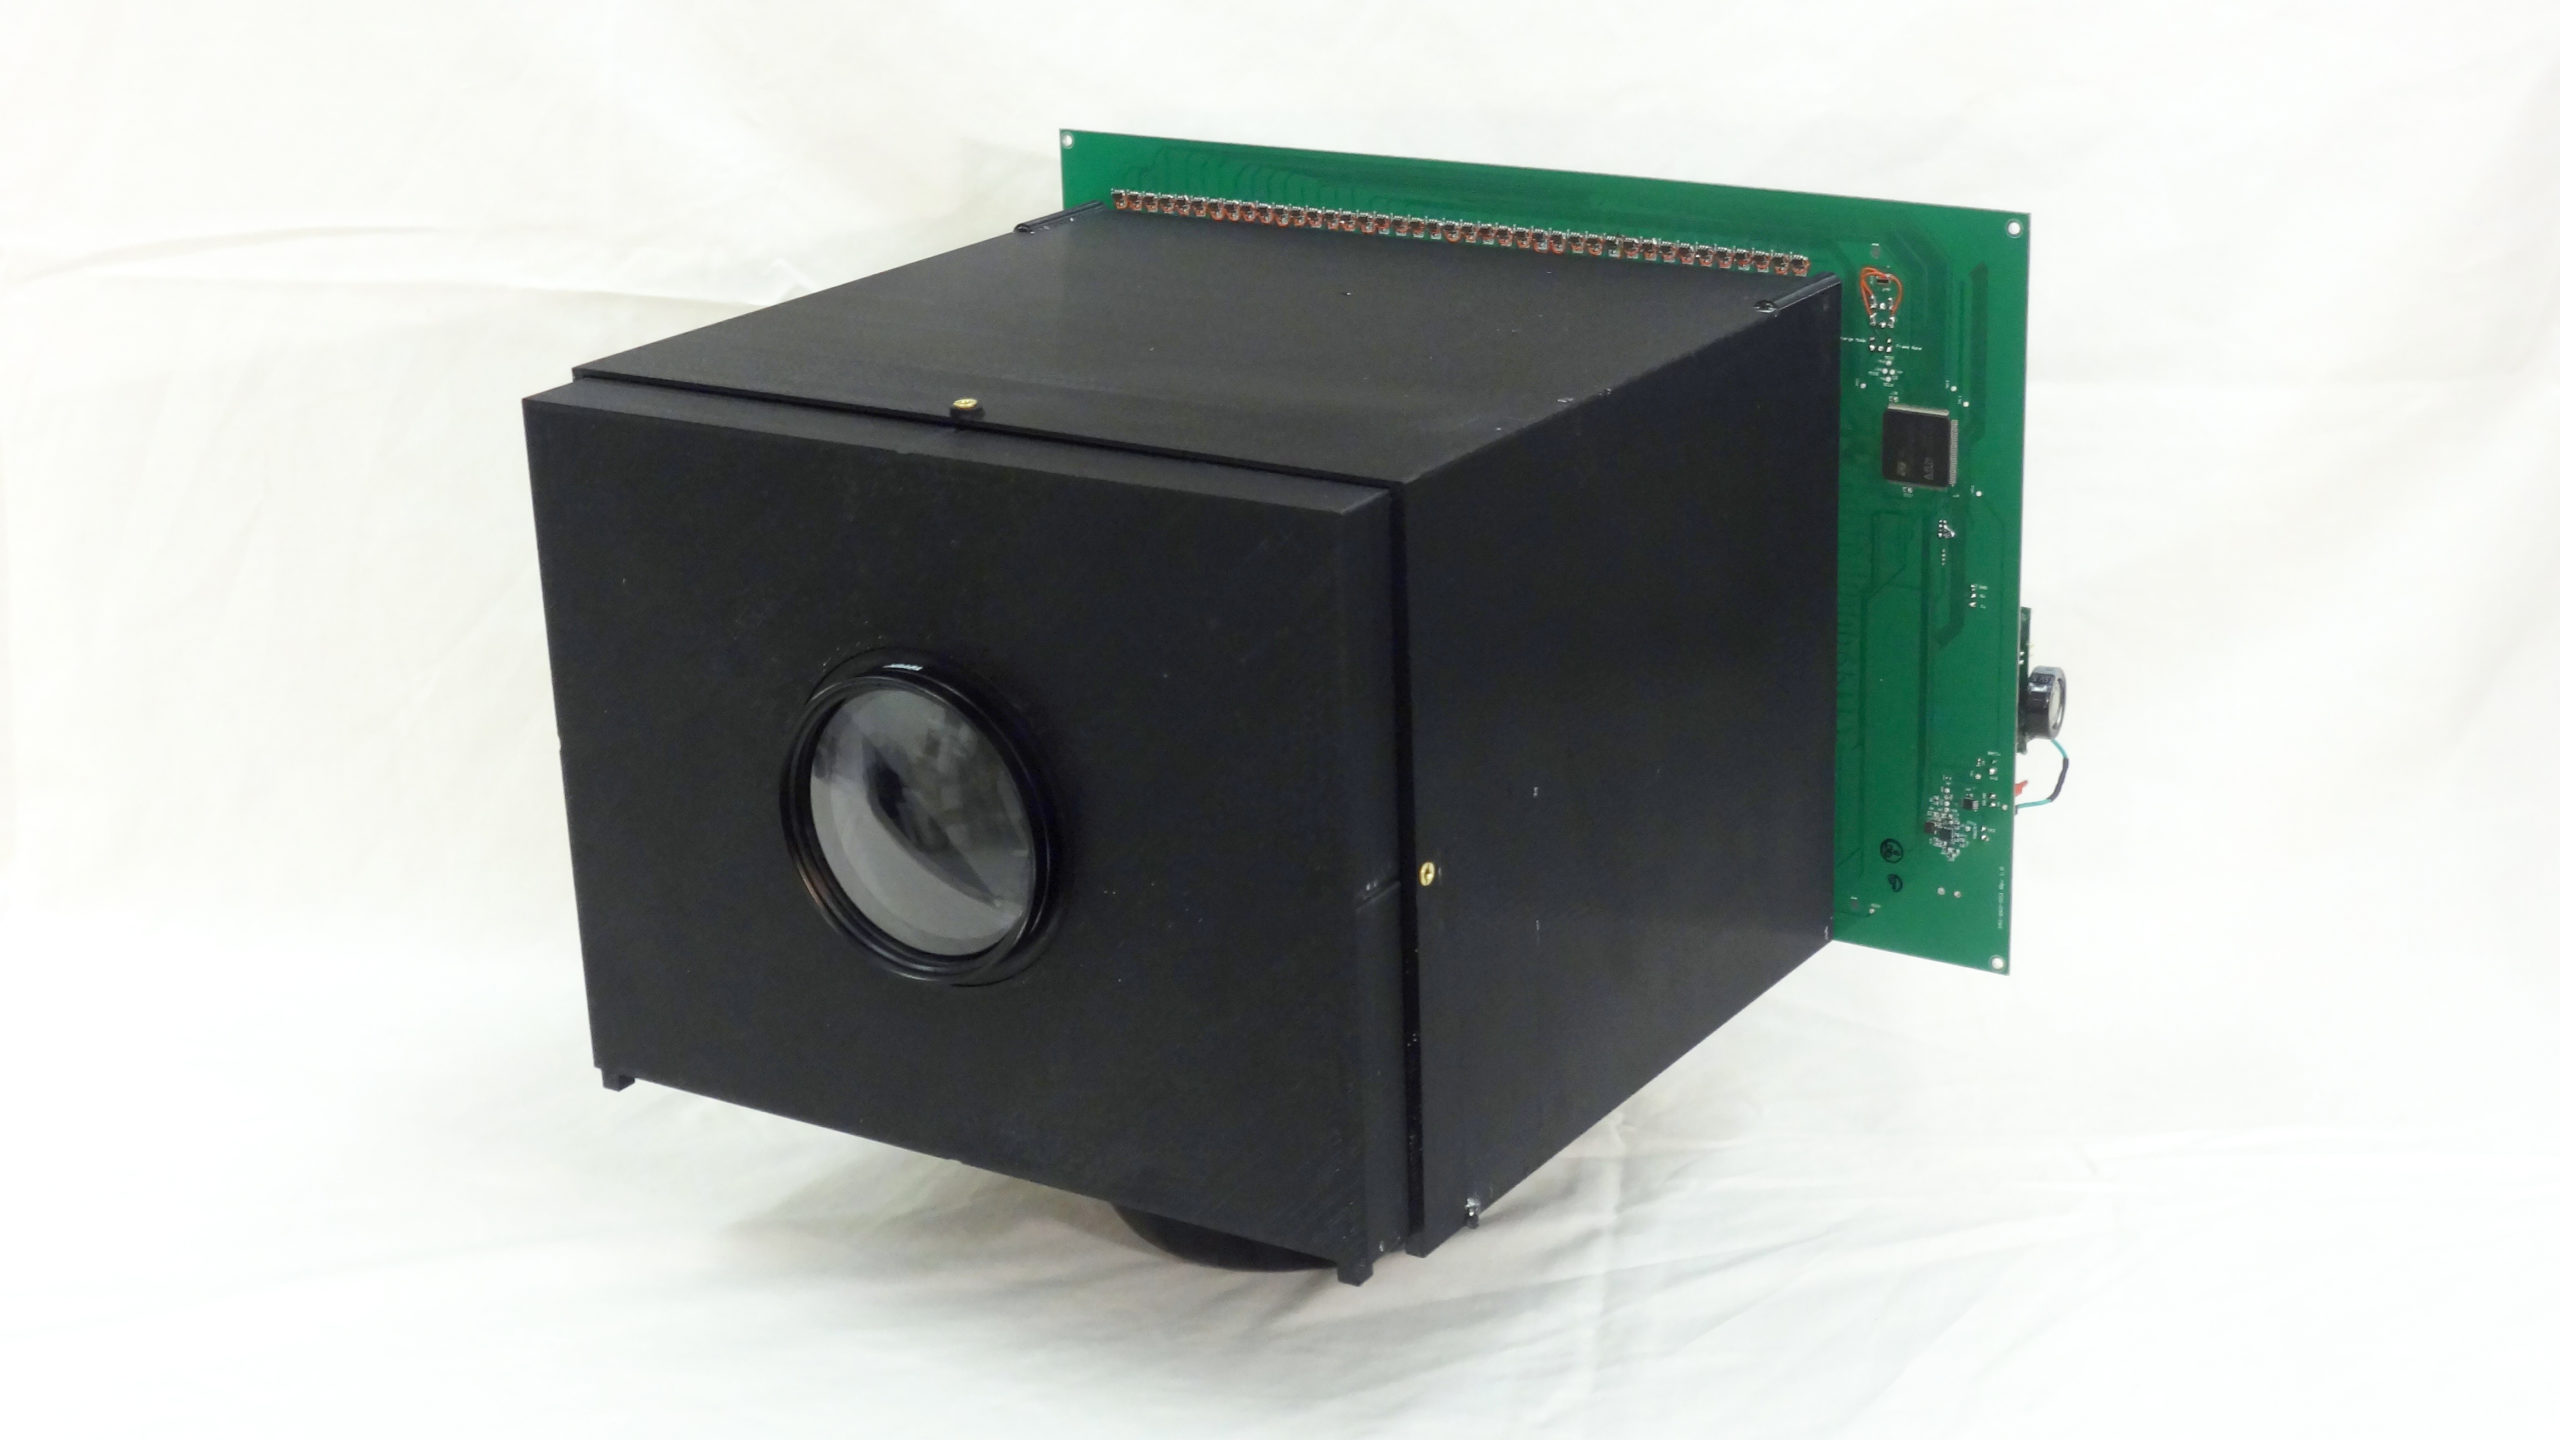 The World’s First Self-Powered Video Camera Can Record Forever